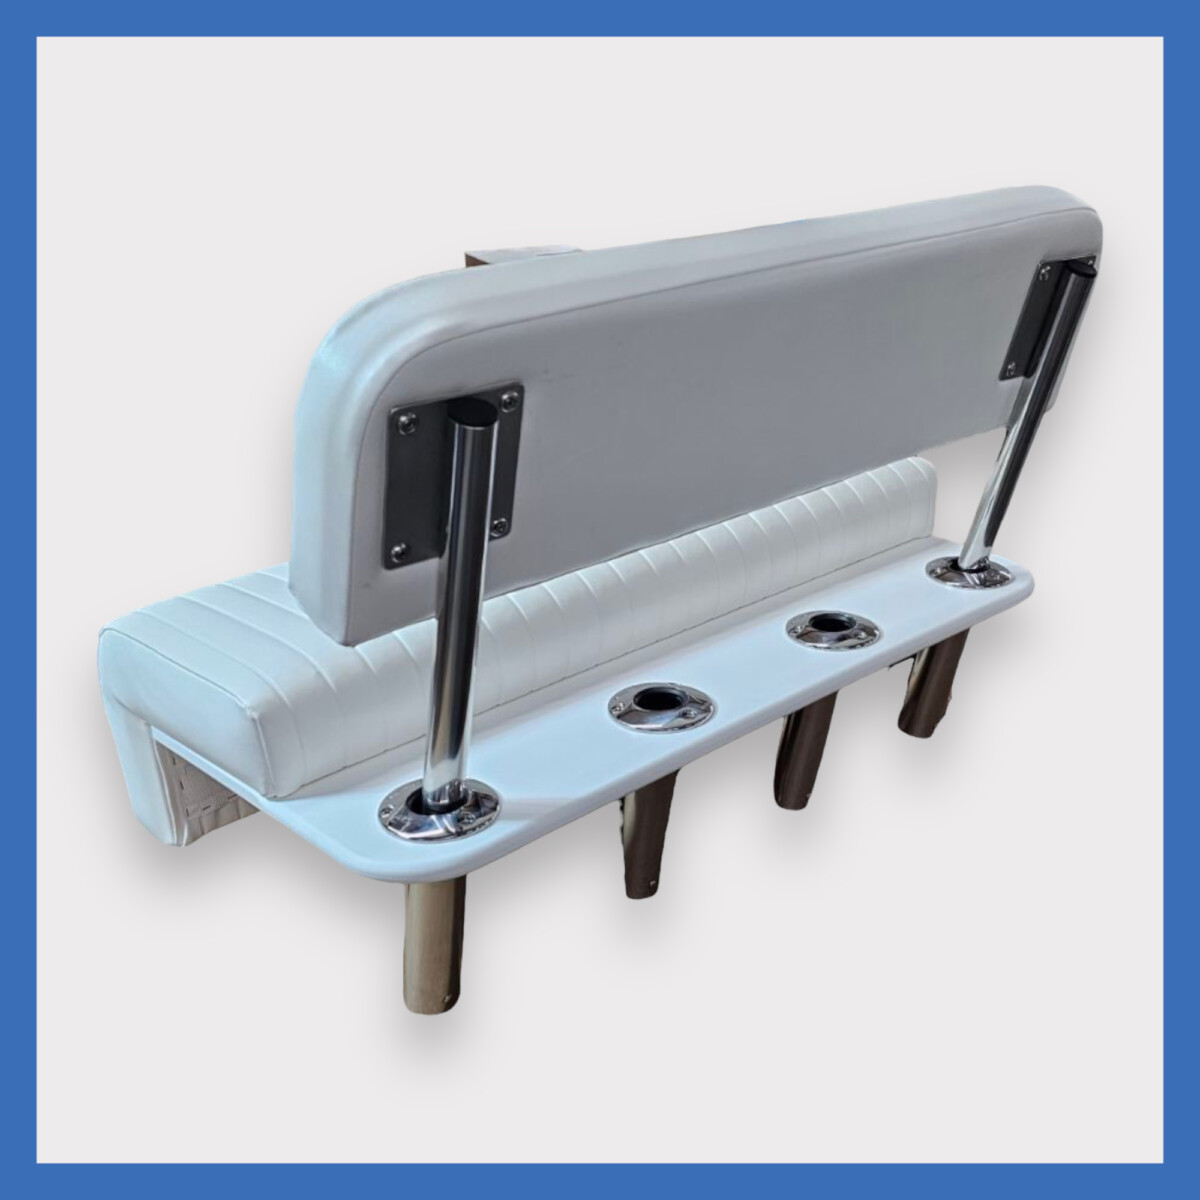 Leaning Post Rod Holders | Starboard Rod Holders